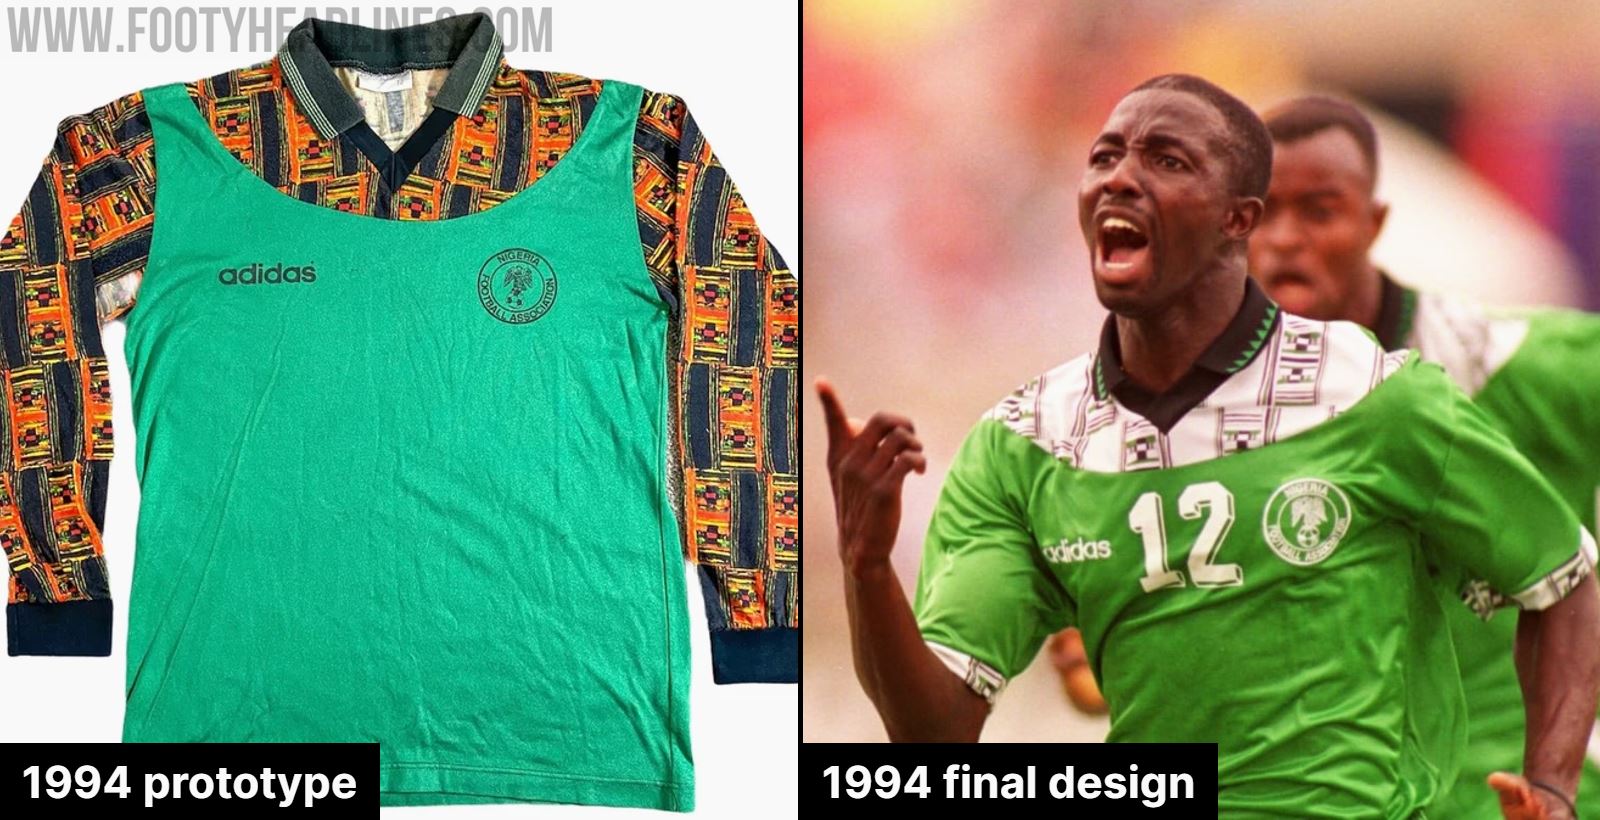 The Shirt That Never Was: Outrageous Adidas 1994 Prototype Kit - Footy Headlines